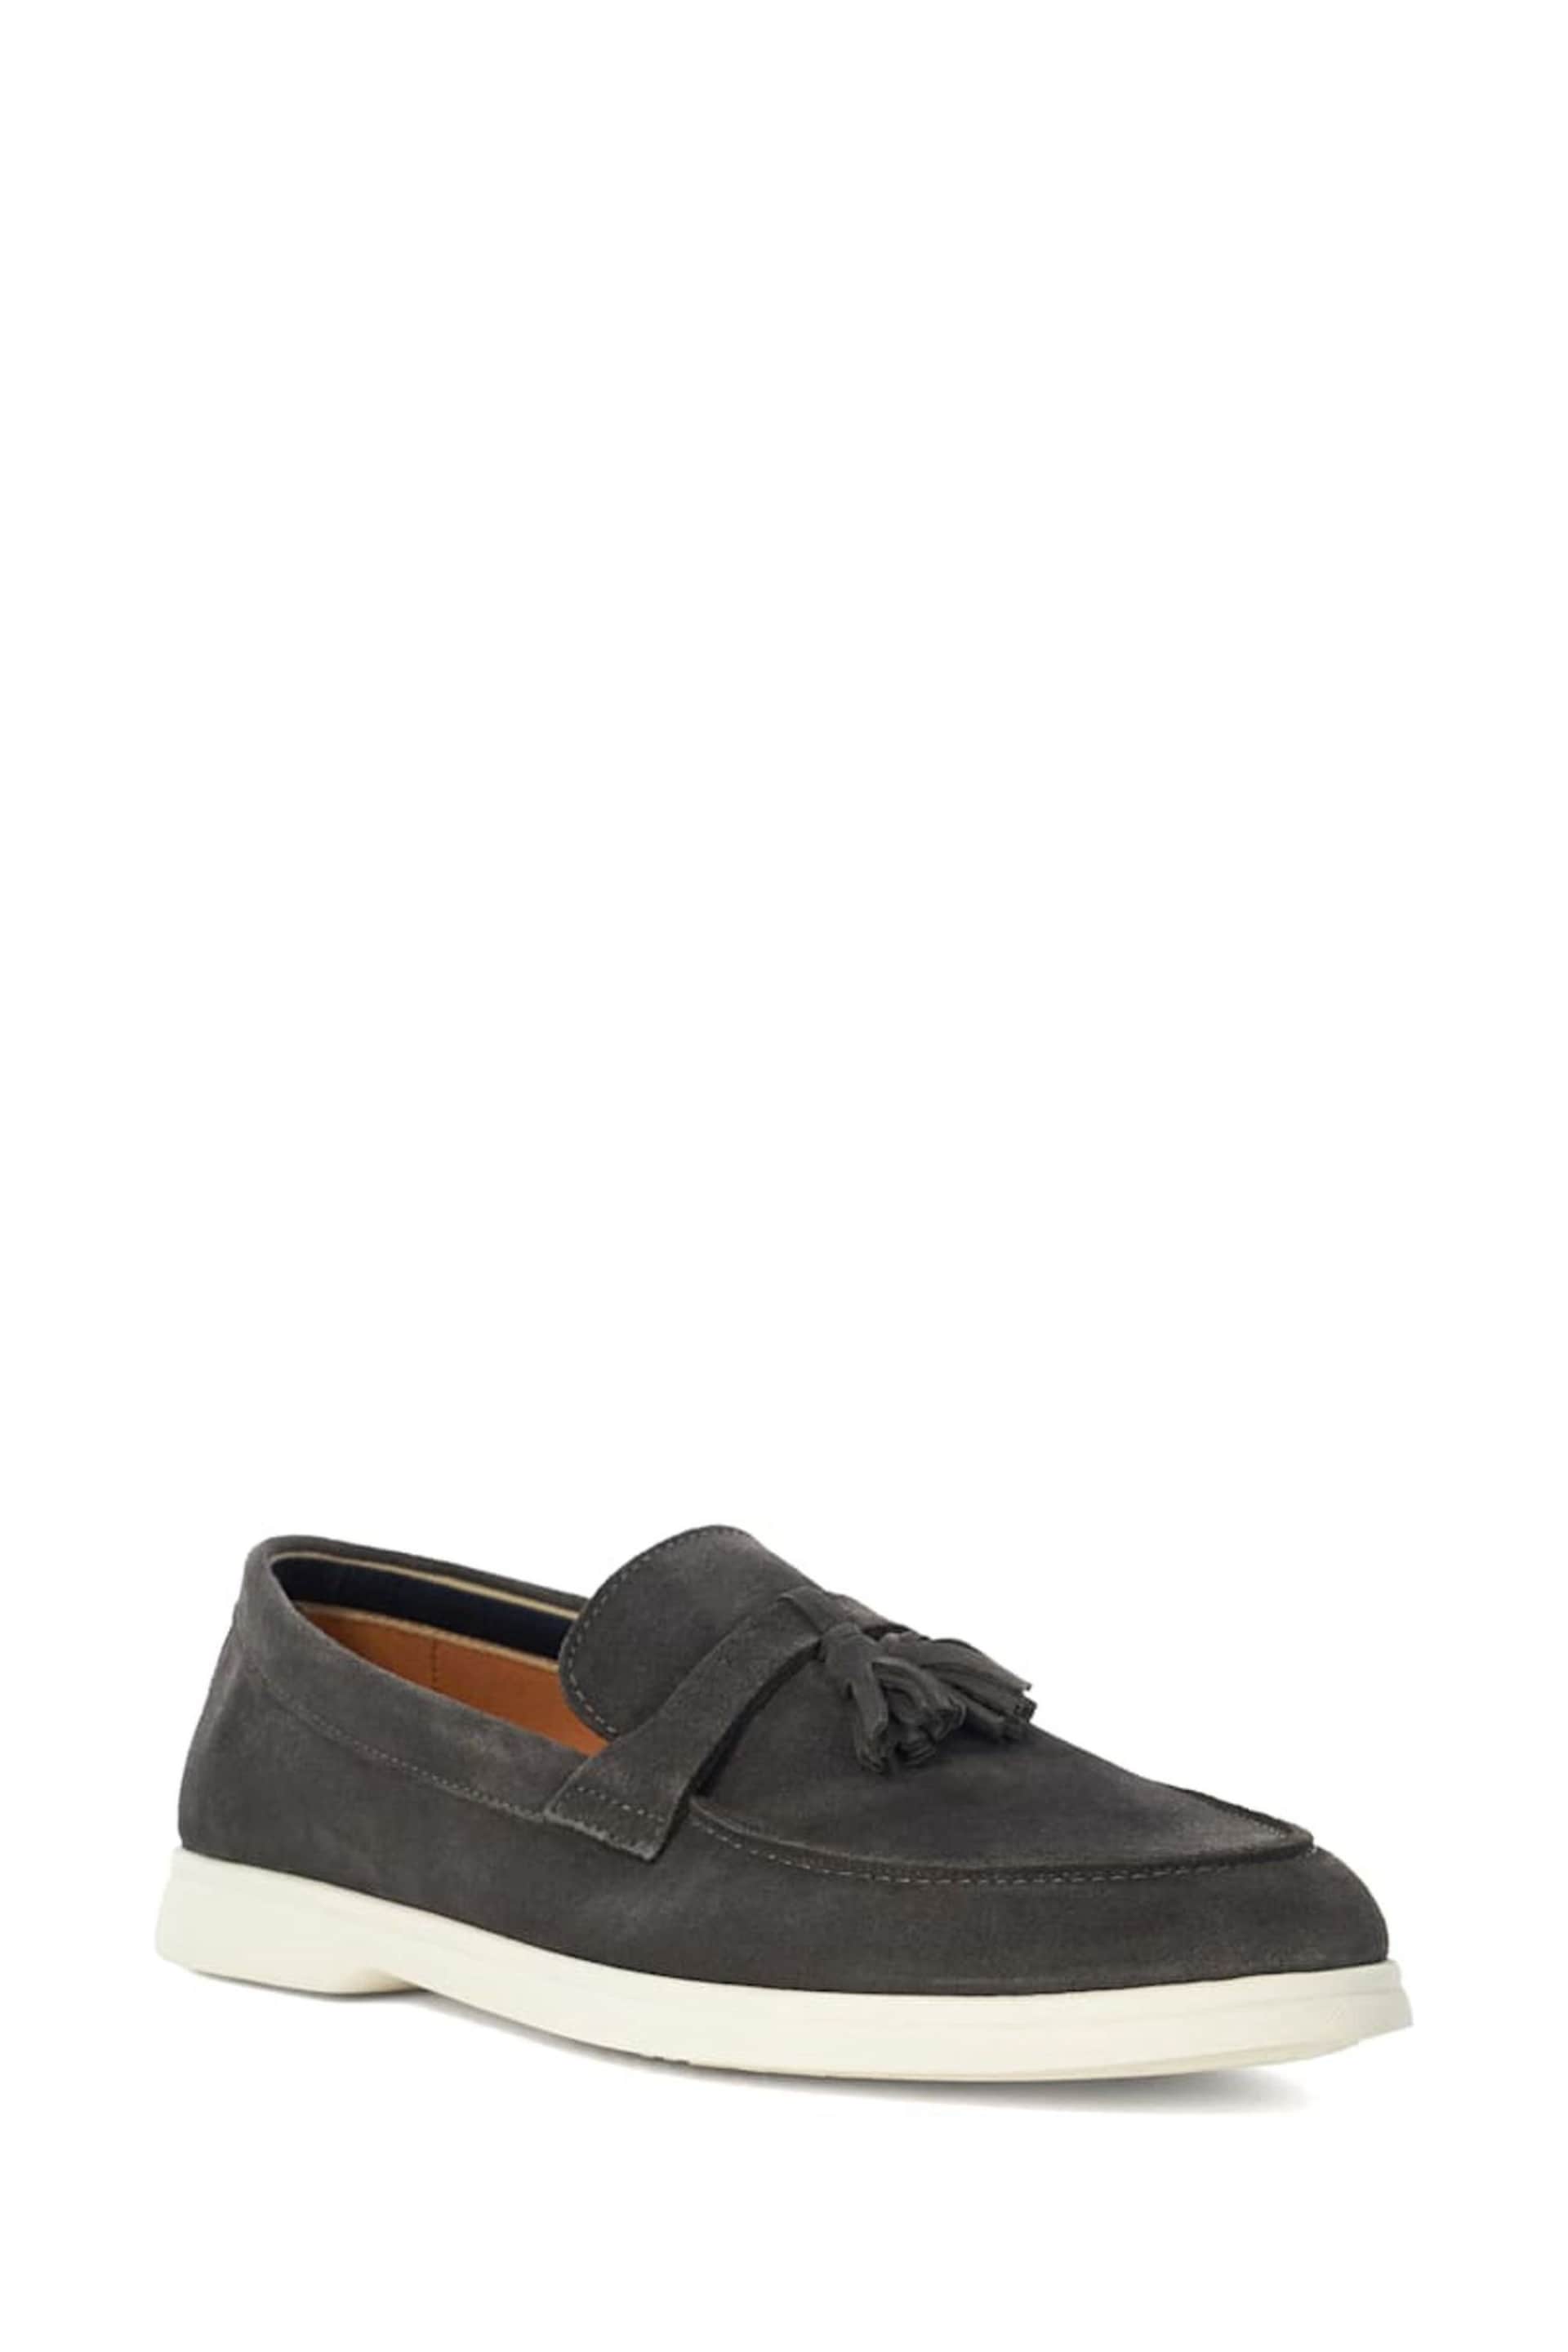 Dune London Grey Believes Top Stitch Tassel Loafers - Image 3 of 6